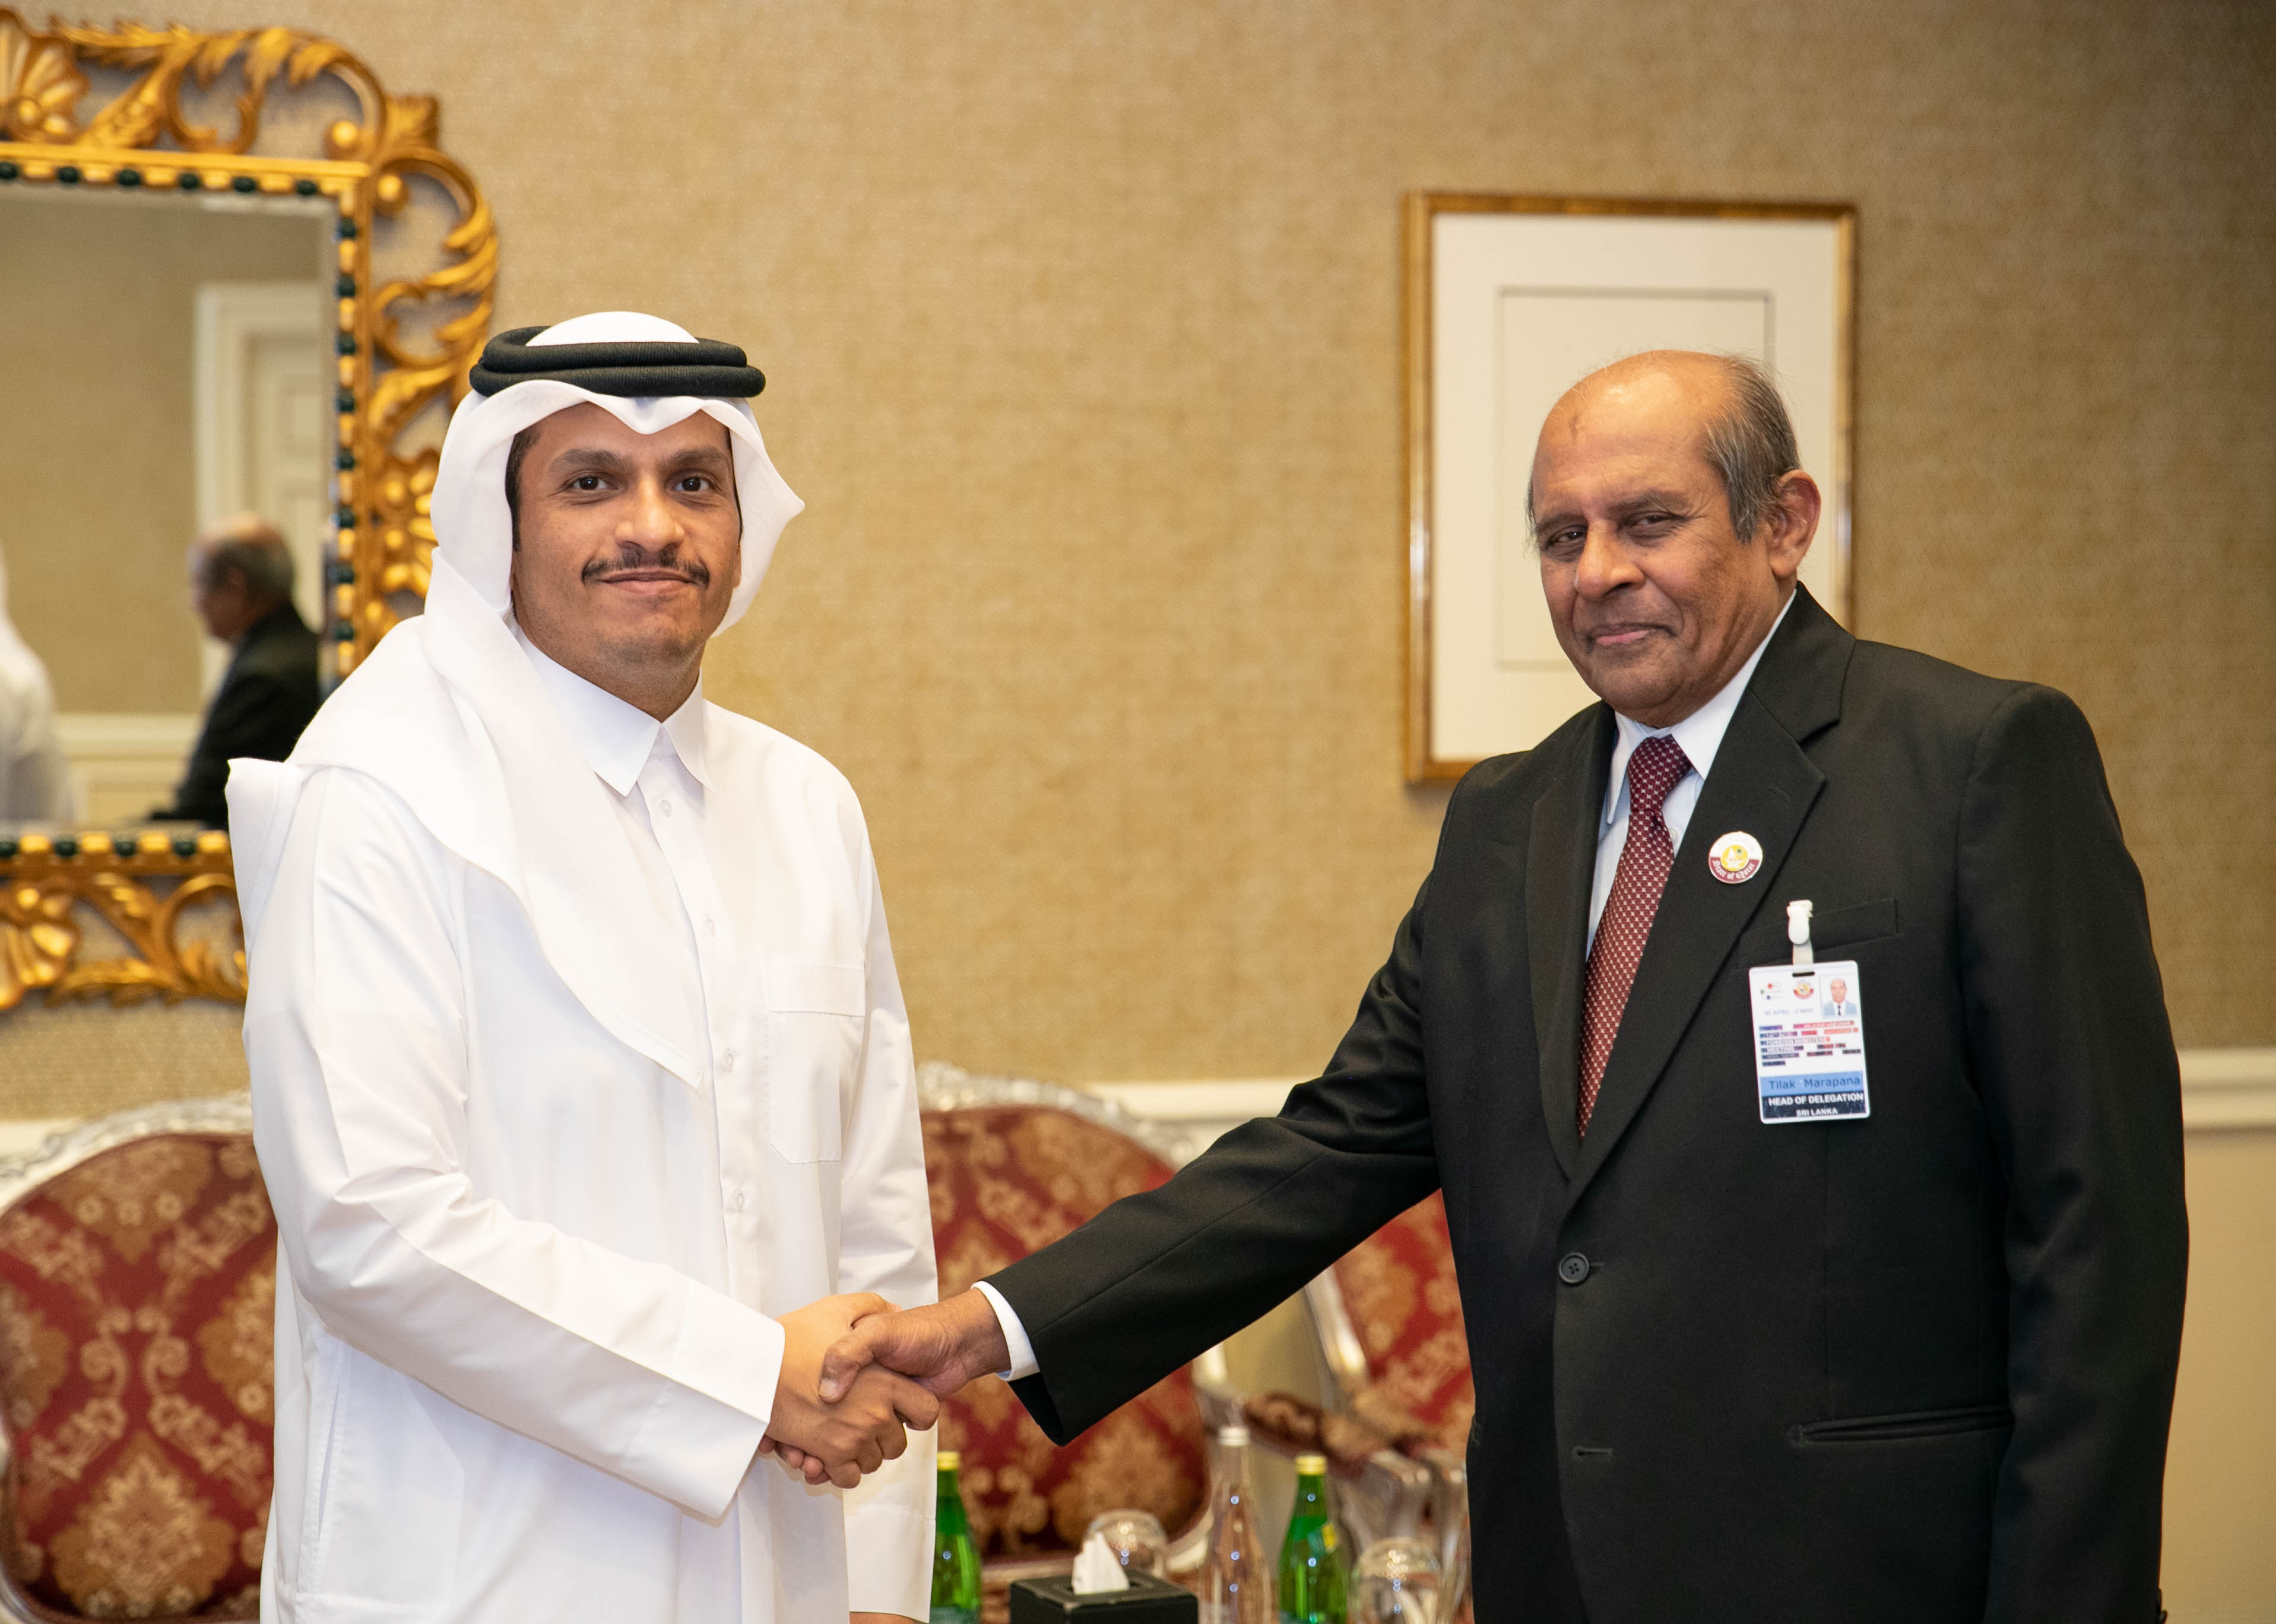 1. Bilateral Meeting with H.E. Sheikh Mohammed bin Abdulrahman bin Jassim Al Thani the Deputy Prime Minister and Minister of Foreign Affairs